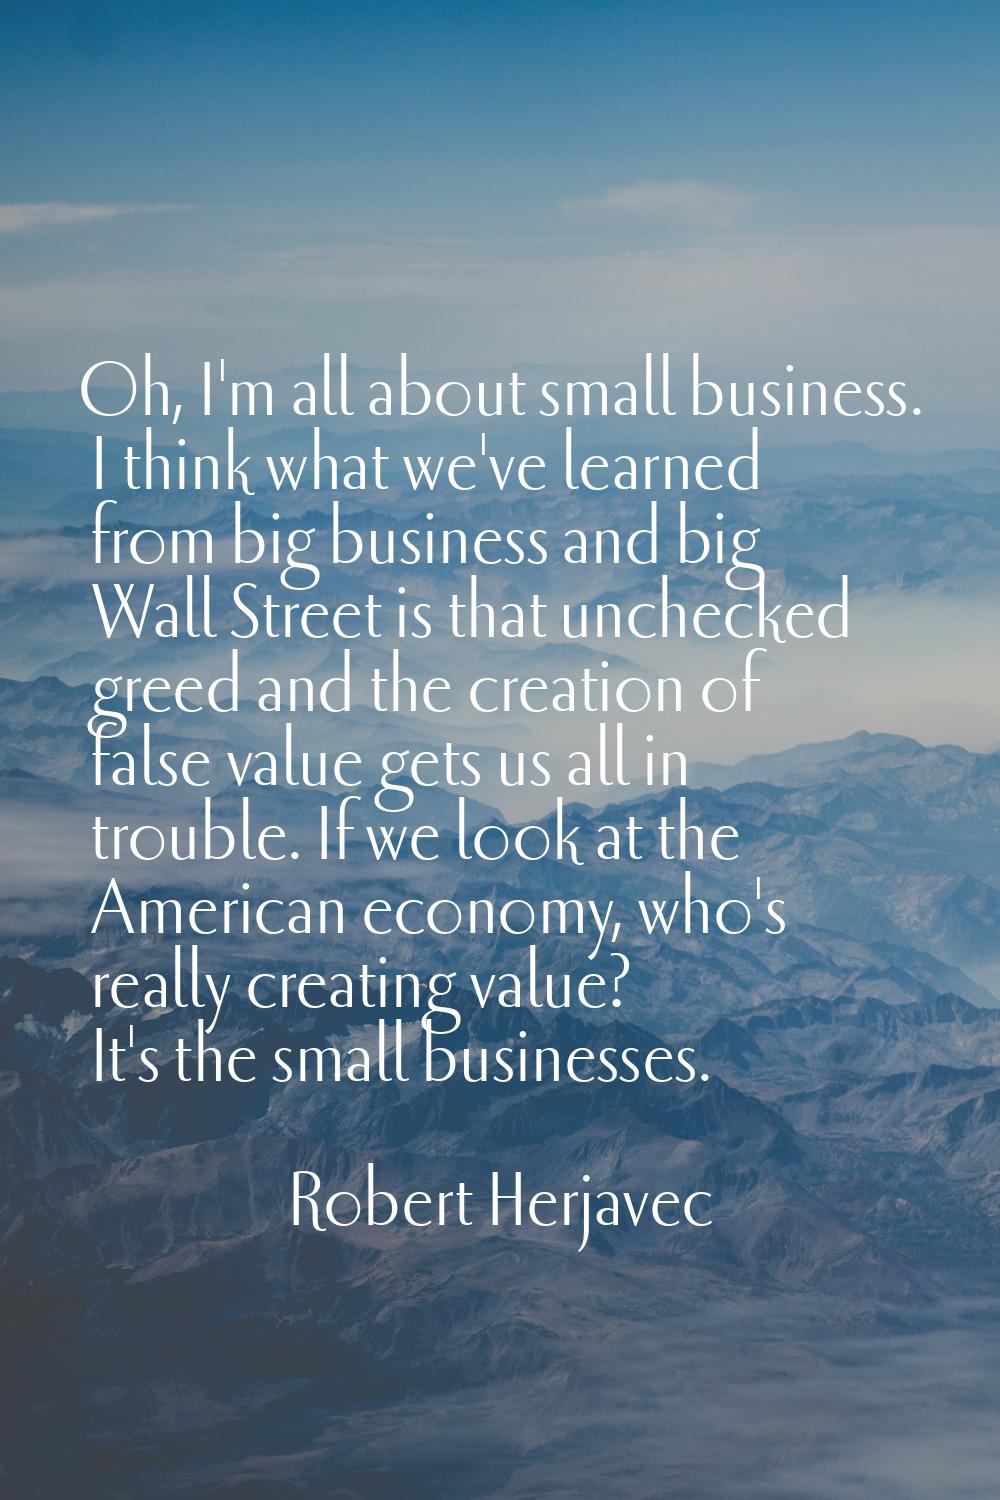 Oh, I'm all about small business. I think what we've learned from big business and big Wall Street 